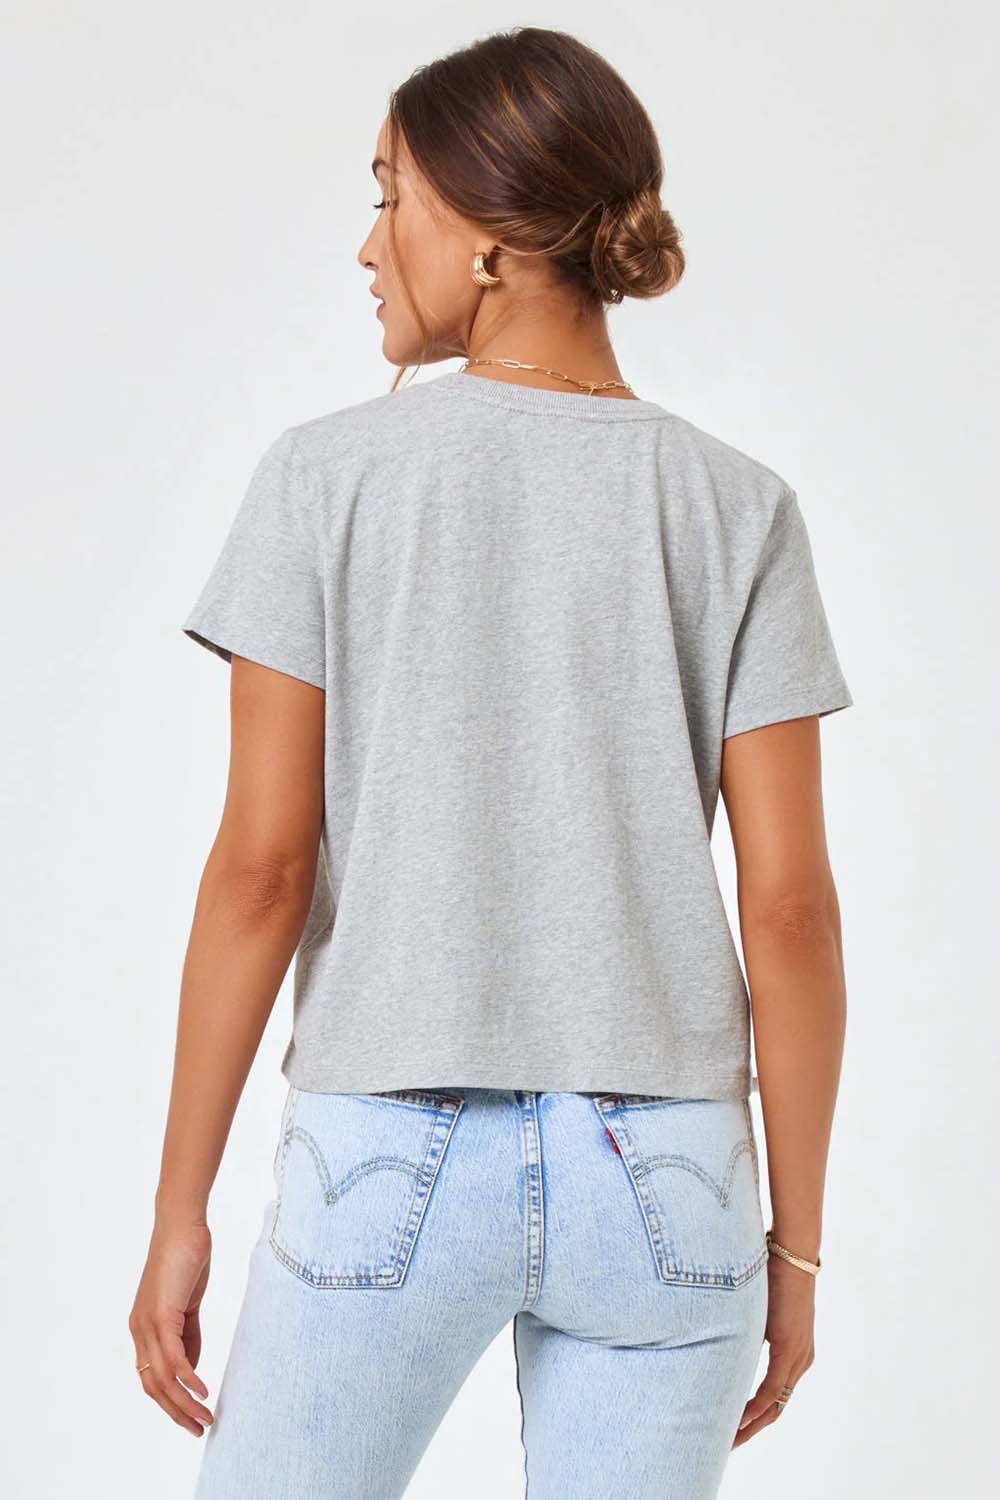 L*Space - All Day Top - Heather Grey - Back